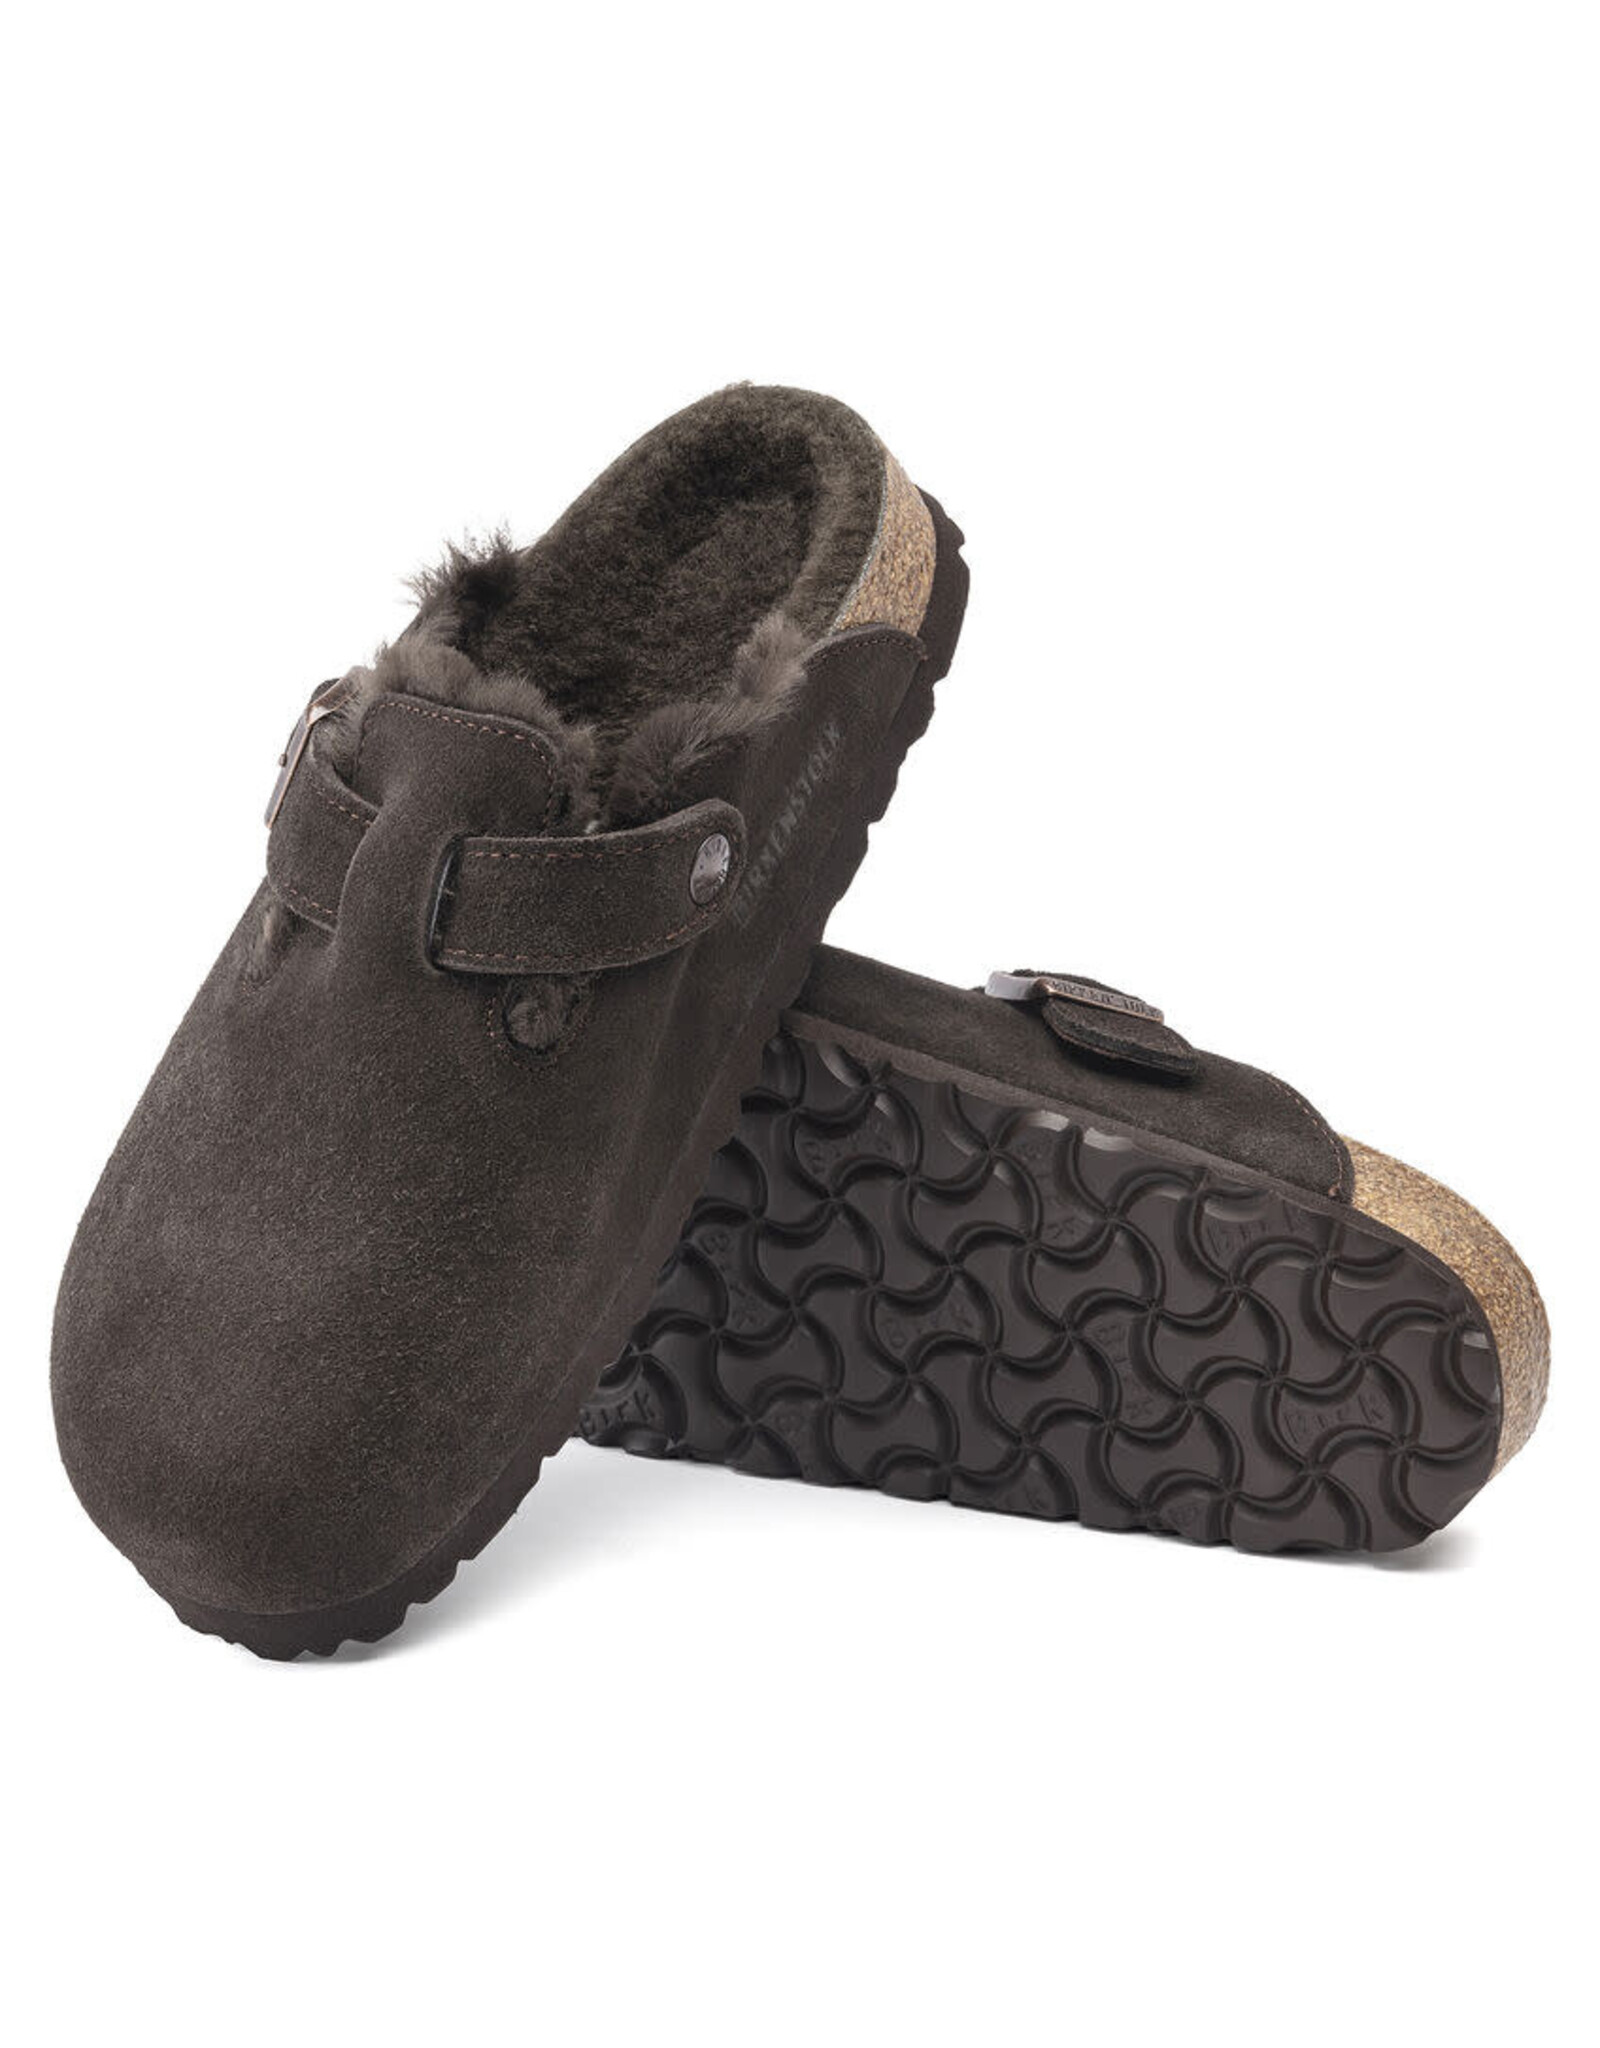 Birkenstock Boston Suede Clog with Shearling Fur Lining